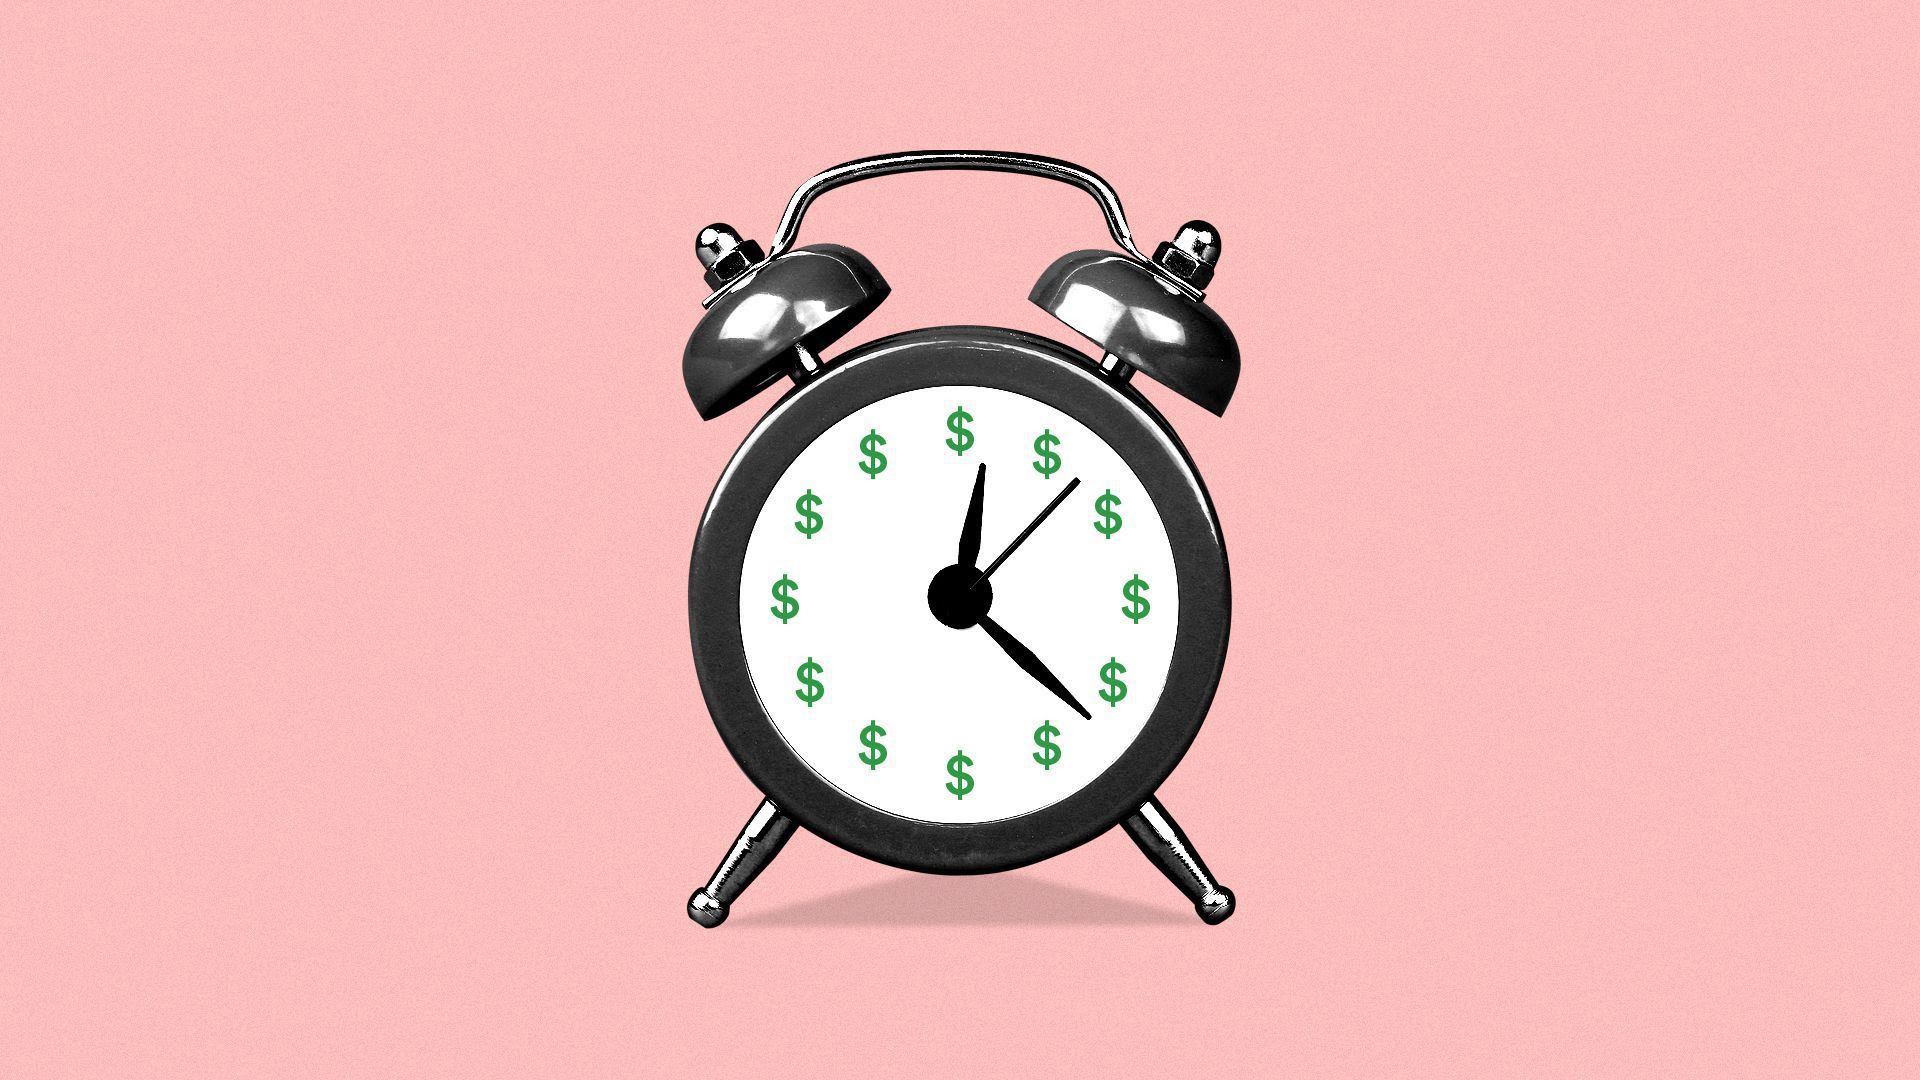 Illustration of a clock with money signs instead of numbers